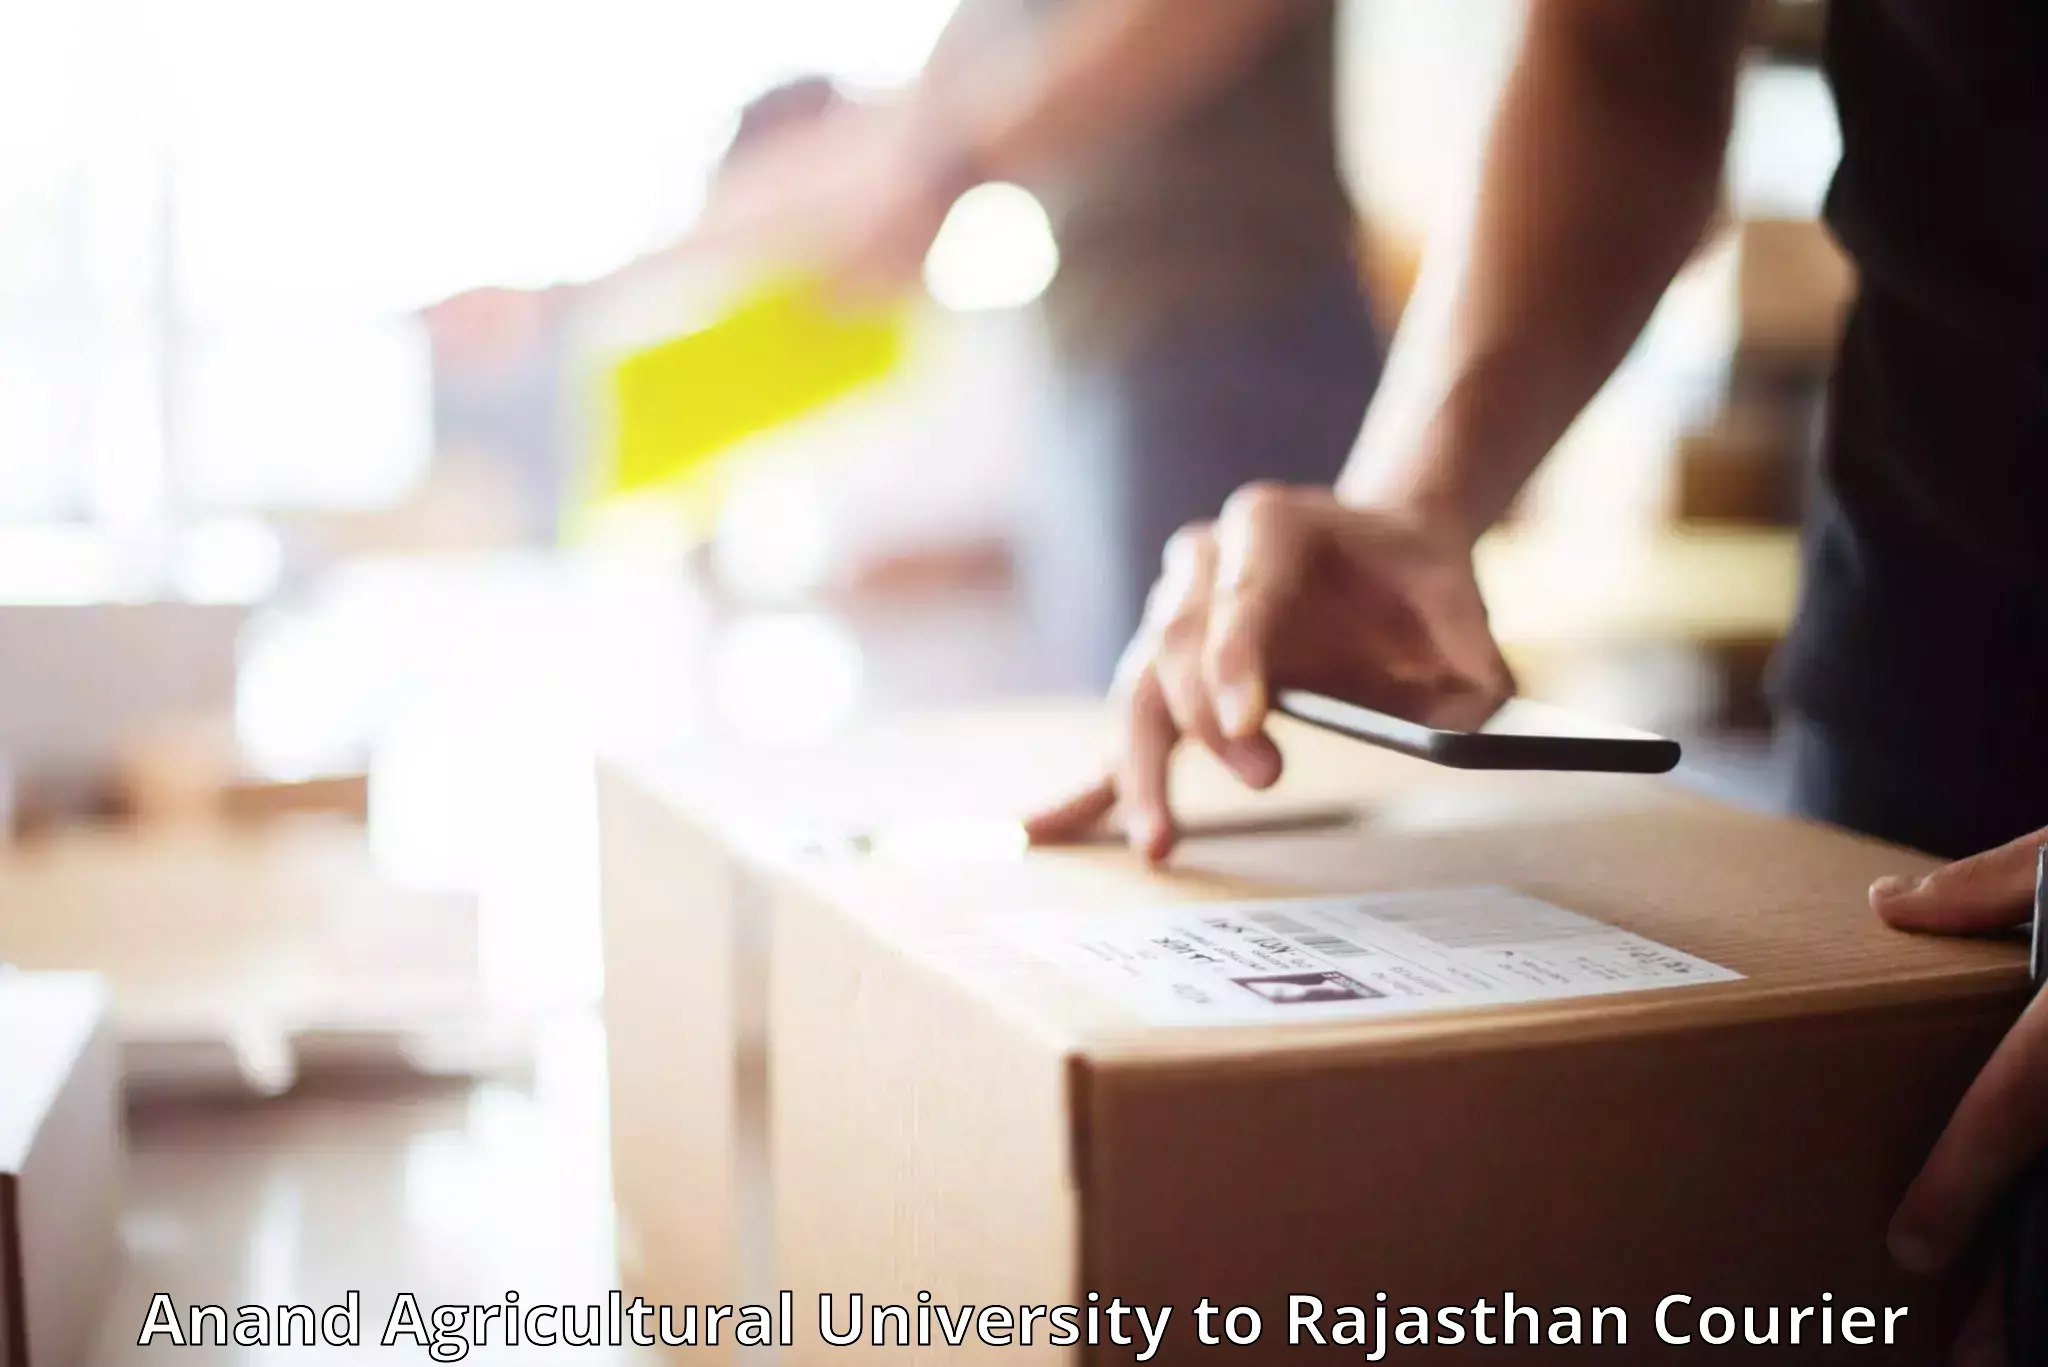 Baggage shipping schedule Anand Agricultural University to Bhopalgarh